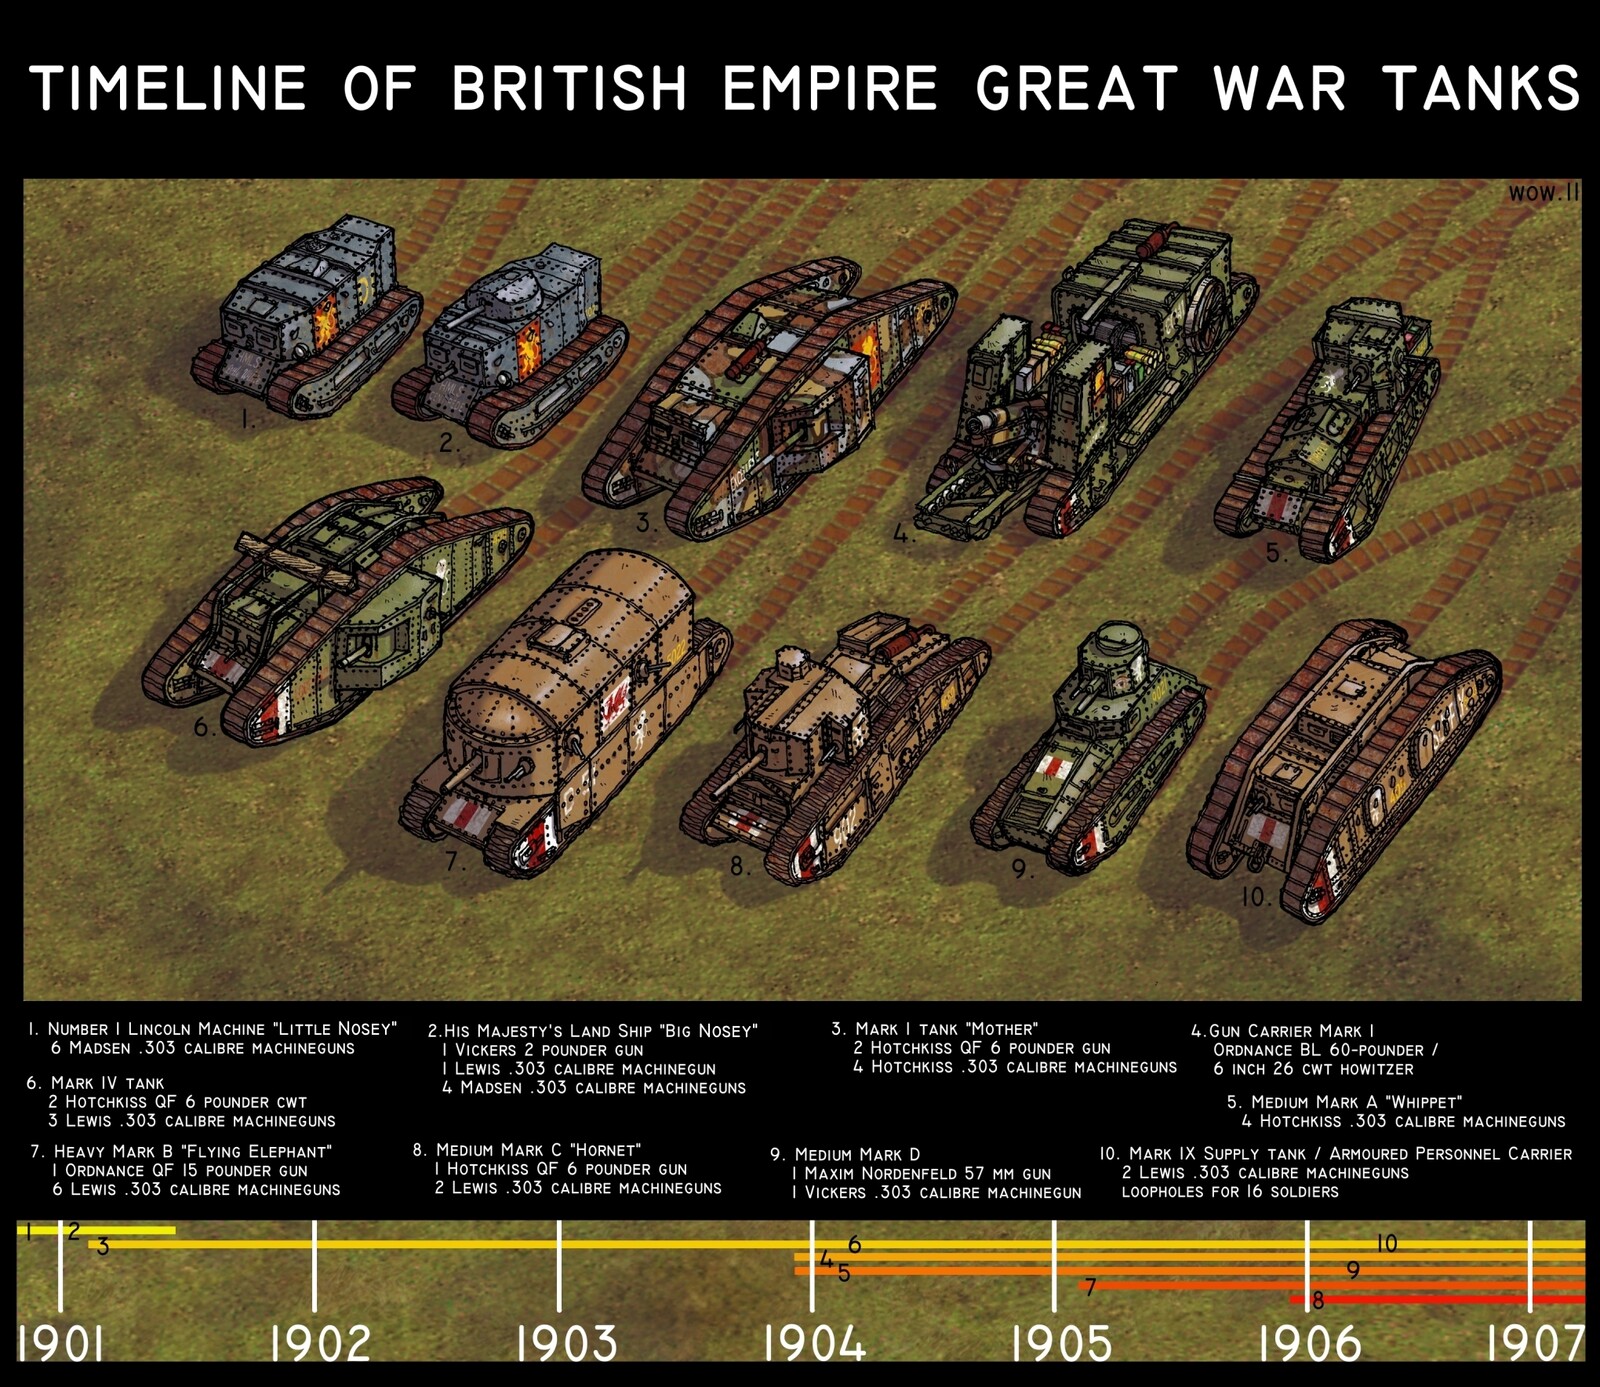 Tanks used by the British Imperial Federation during the Great War against the Second French Empire, 1899 to 1907. Also mix of fictional and real-world designs. 